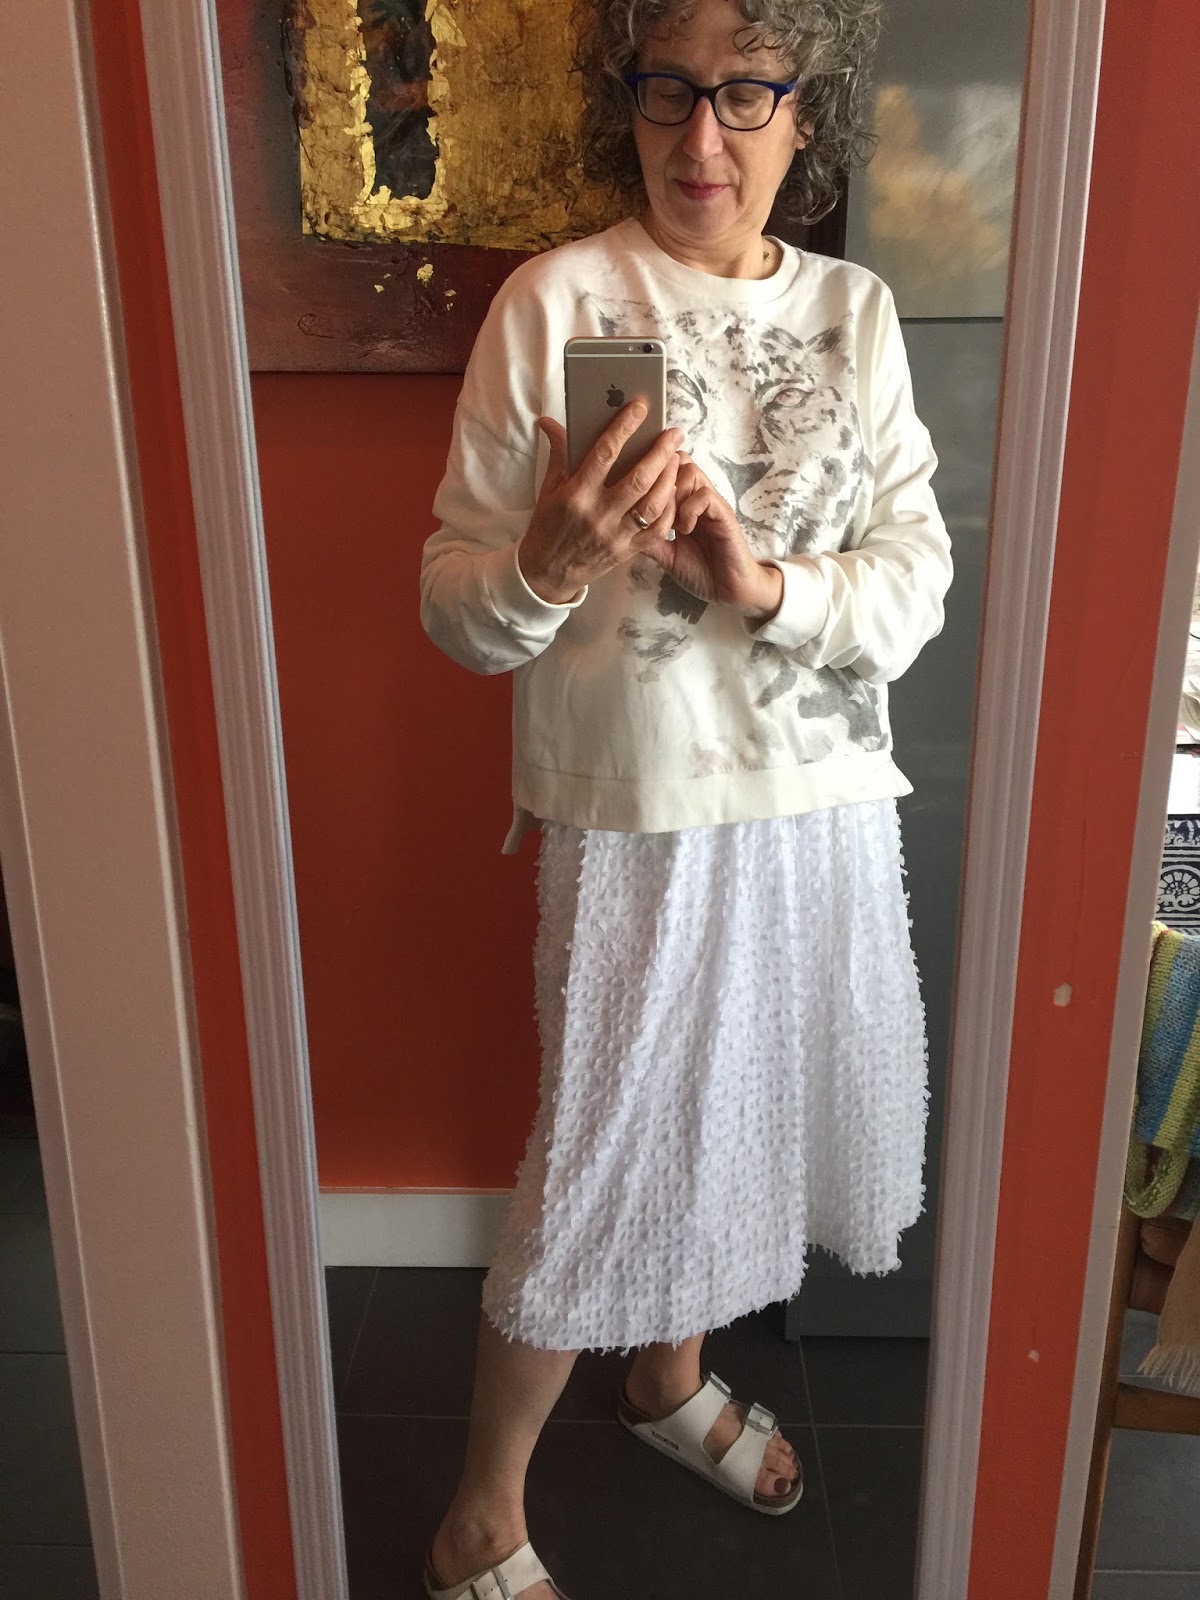 A What-I-Wore Wednesday Round-up